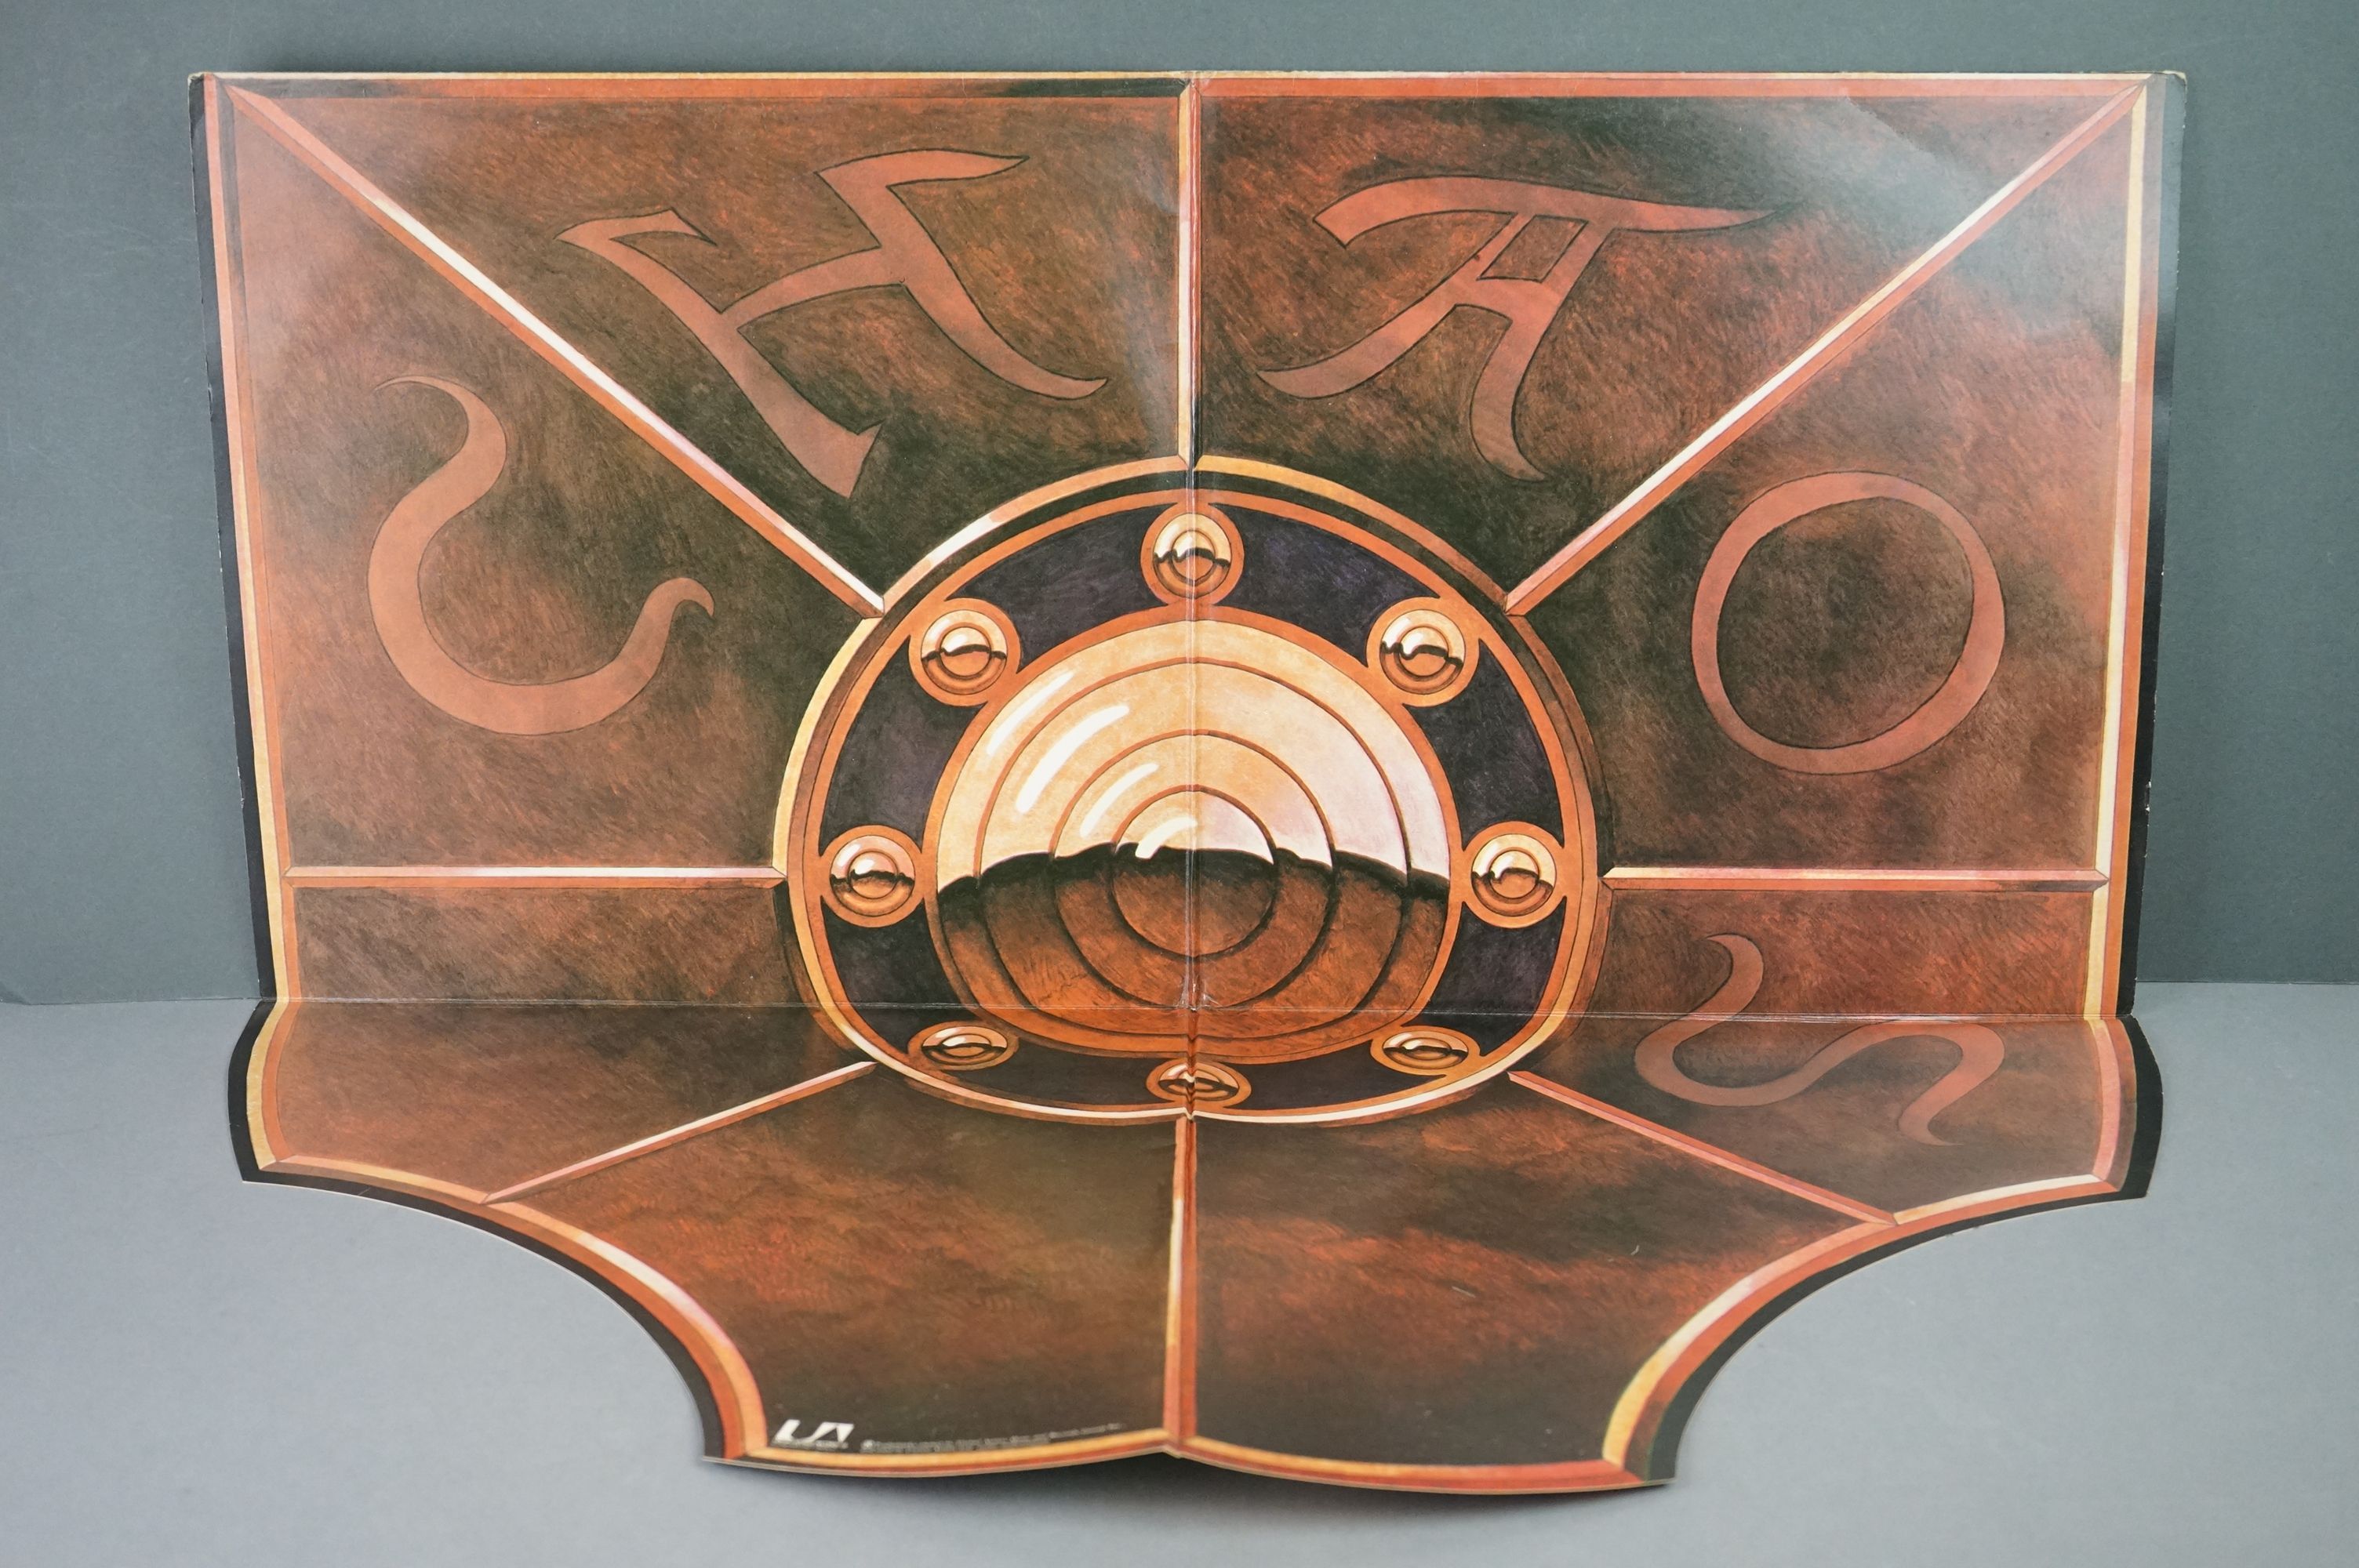 Vinyl - Hawkwind Warrior On The Edge Of Time (UAG 29766) complete with inner, gatefold intact. - Image 3 of 8